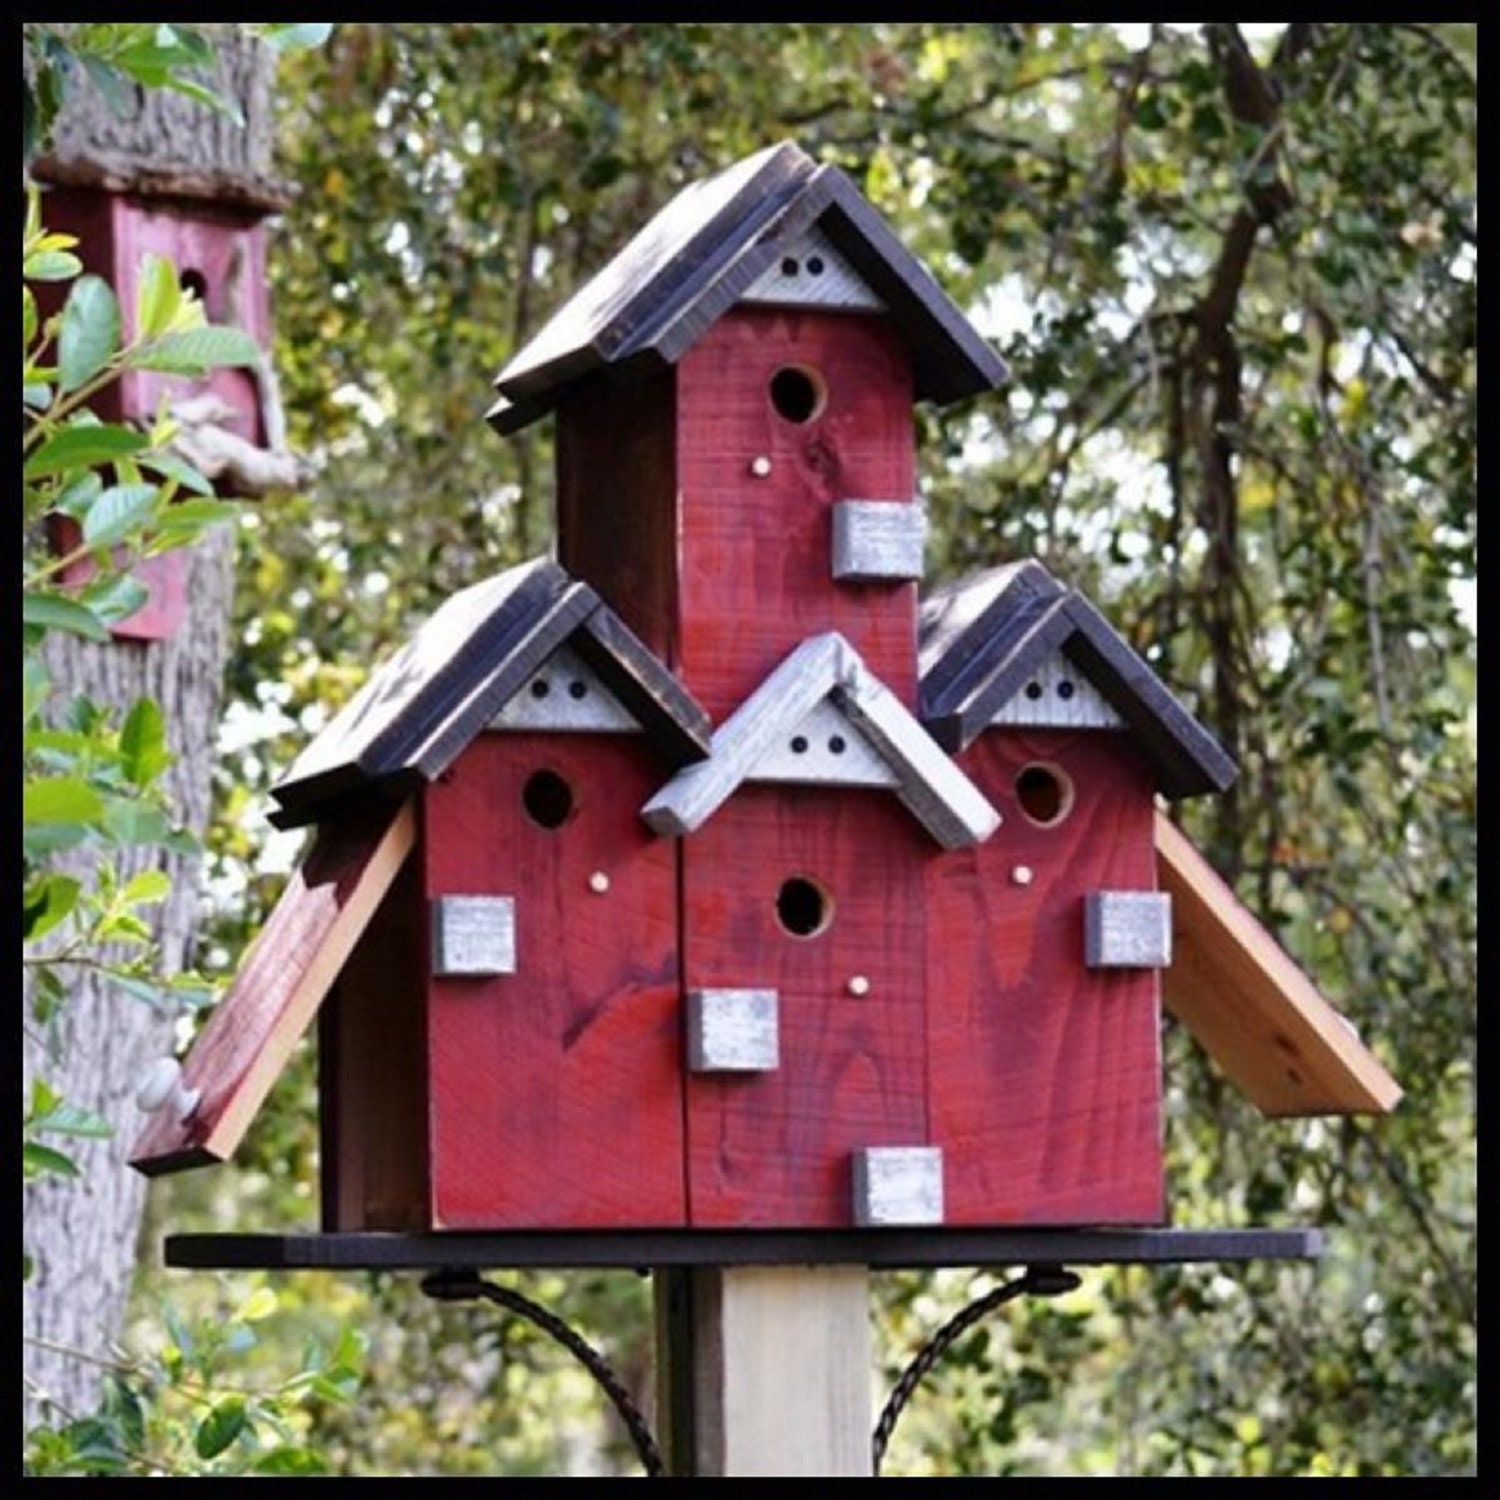 Chateau Bird House and Decorative Mounting Post Kit